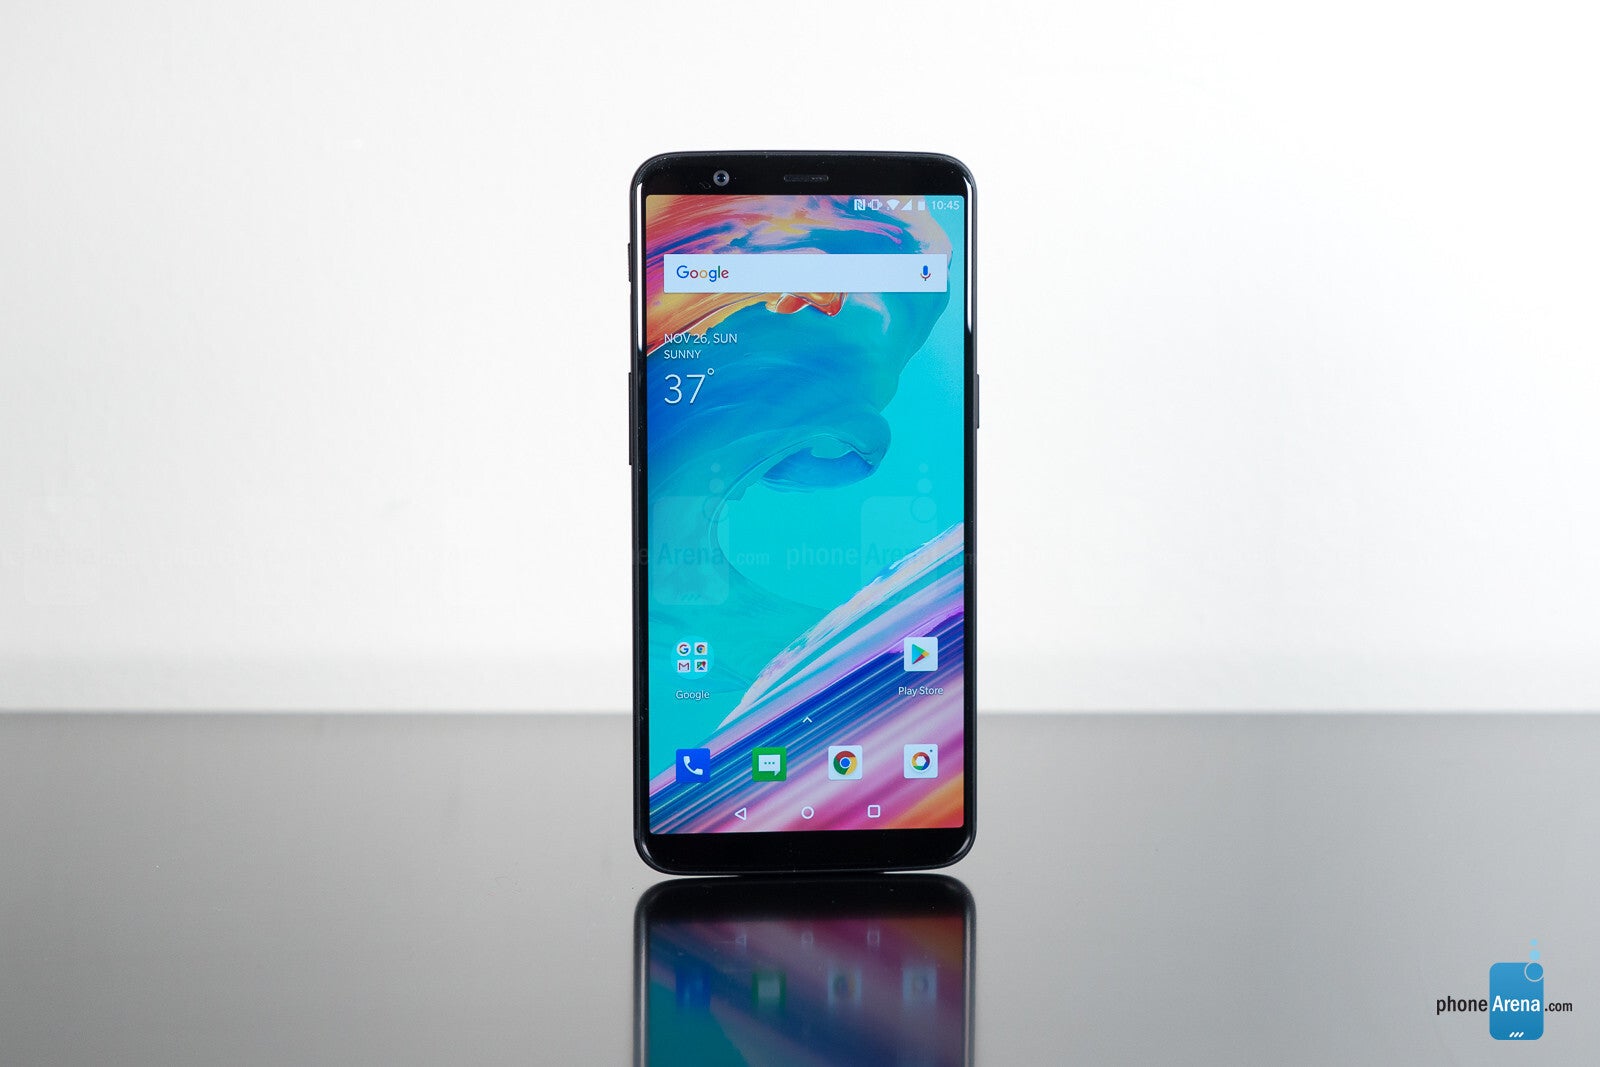 In 2019, OnePlus truly earned the nickname “Flagship Killer”